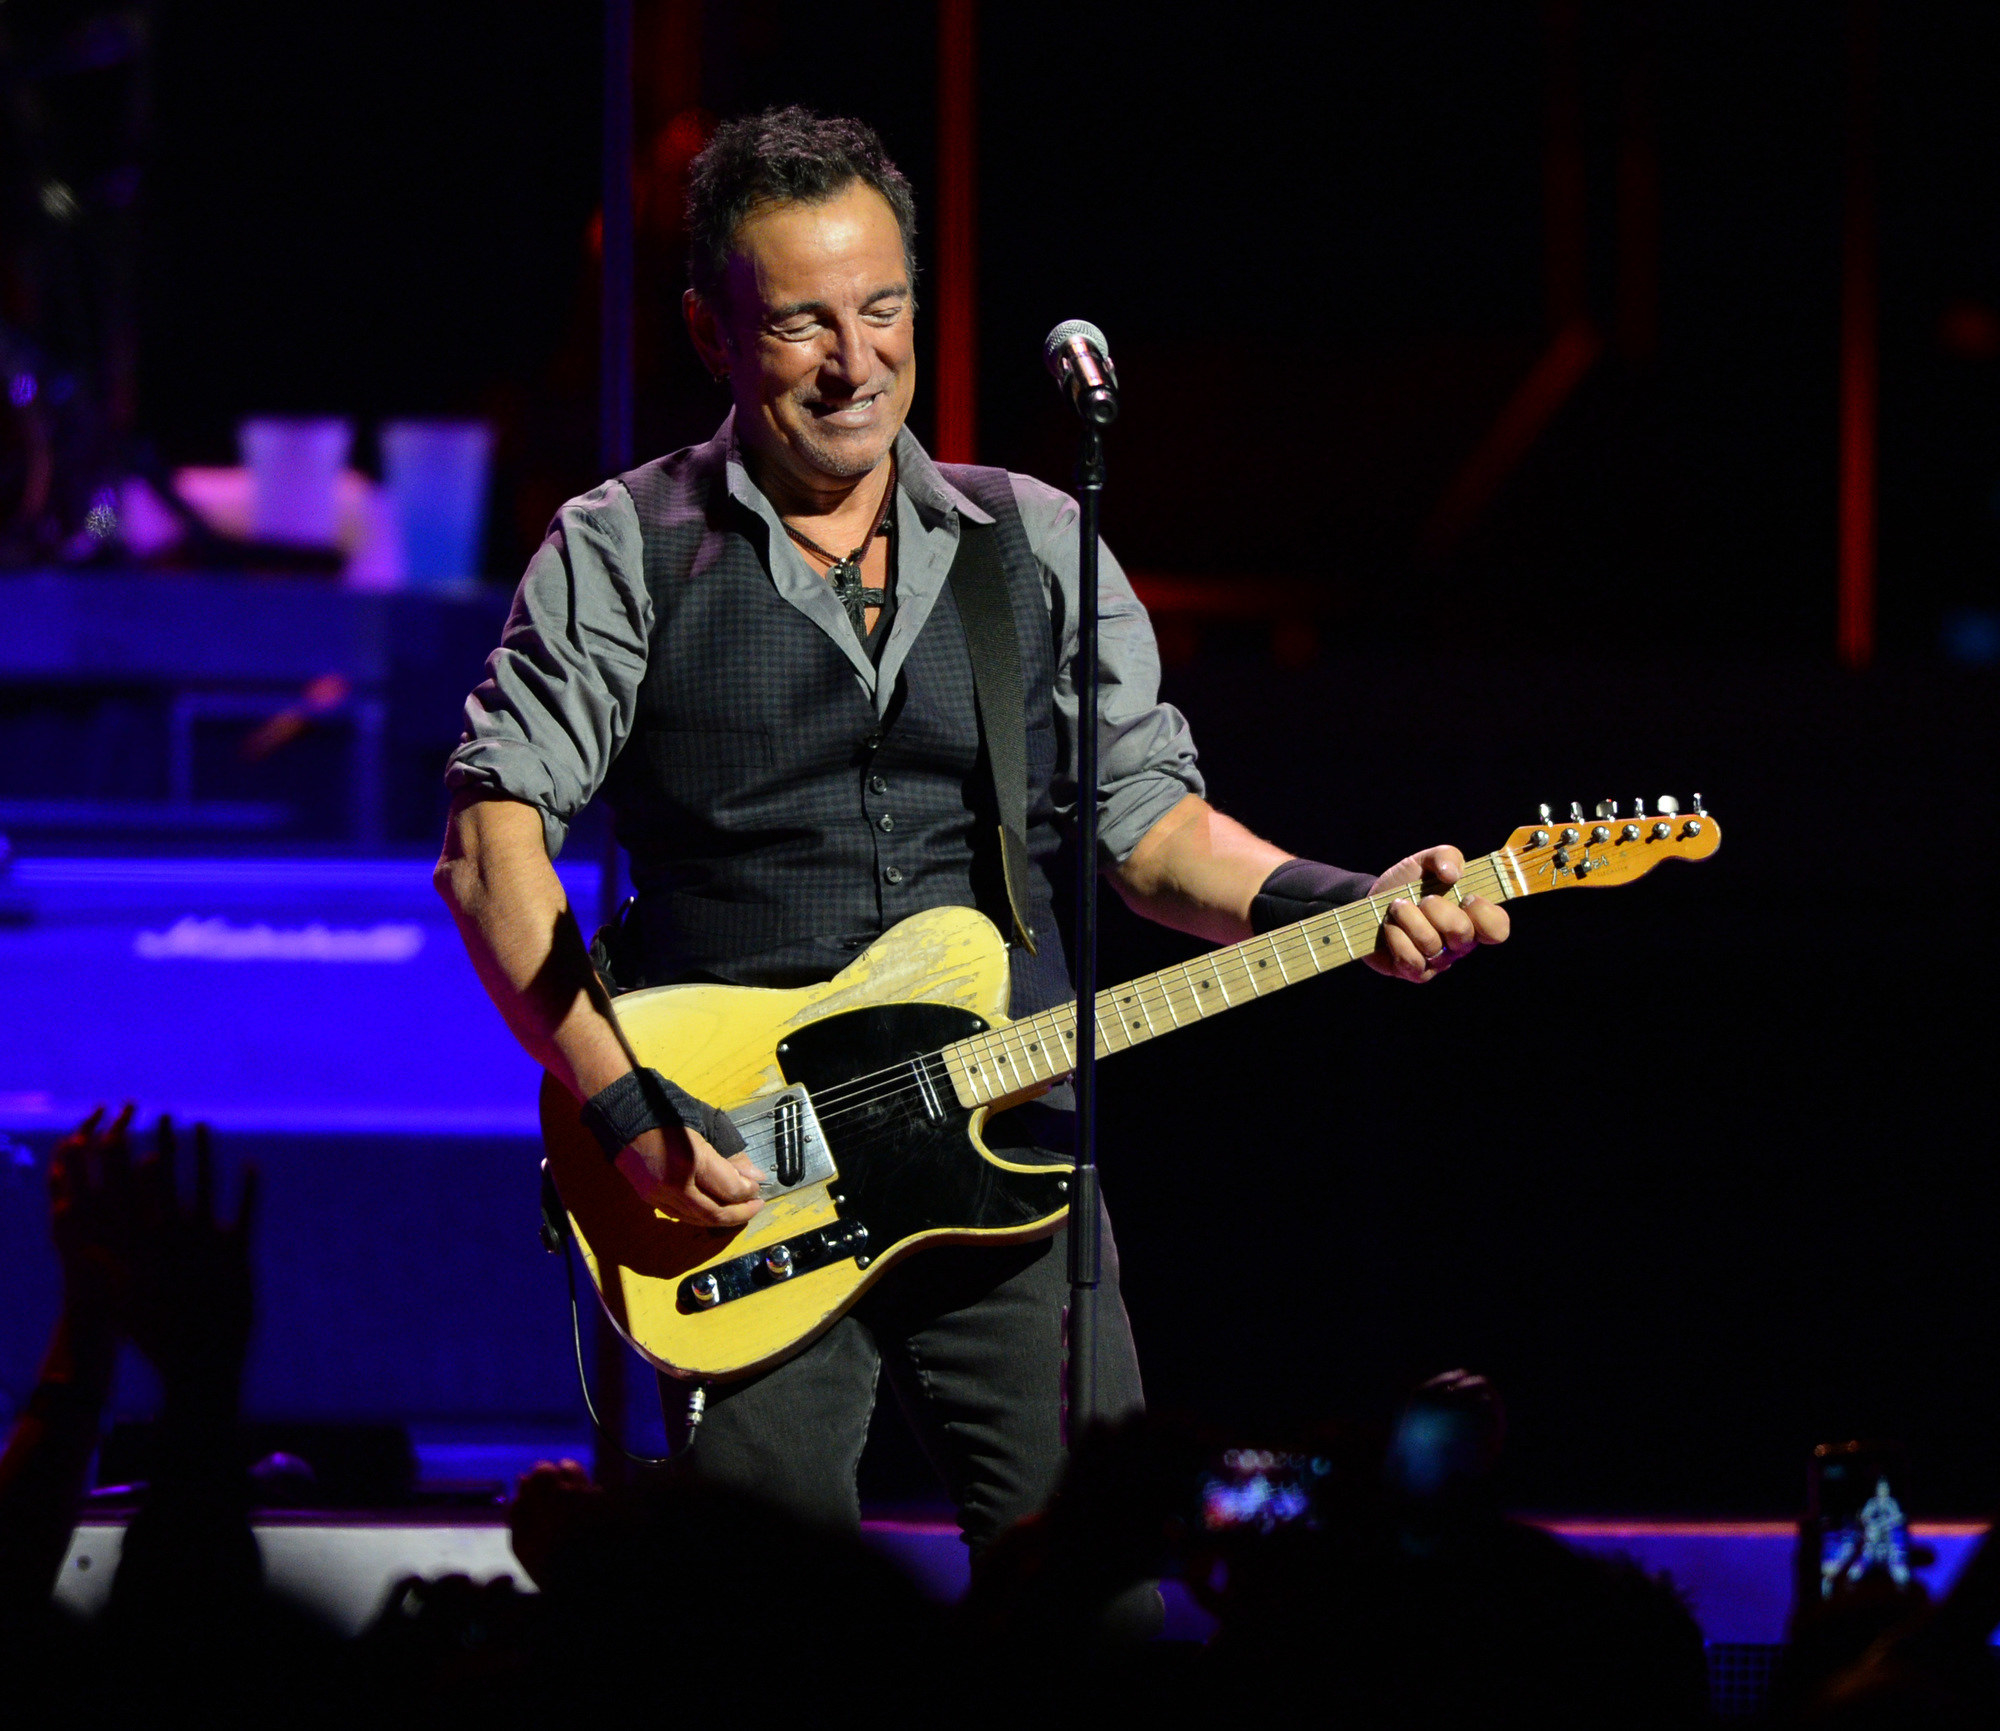 Bruce Springsteen and the E Street Band perform at TD Garden in Boston on Thursday, February 04, 2016